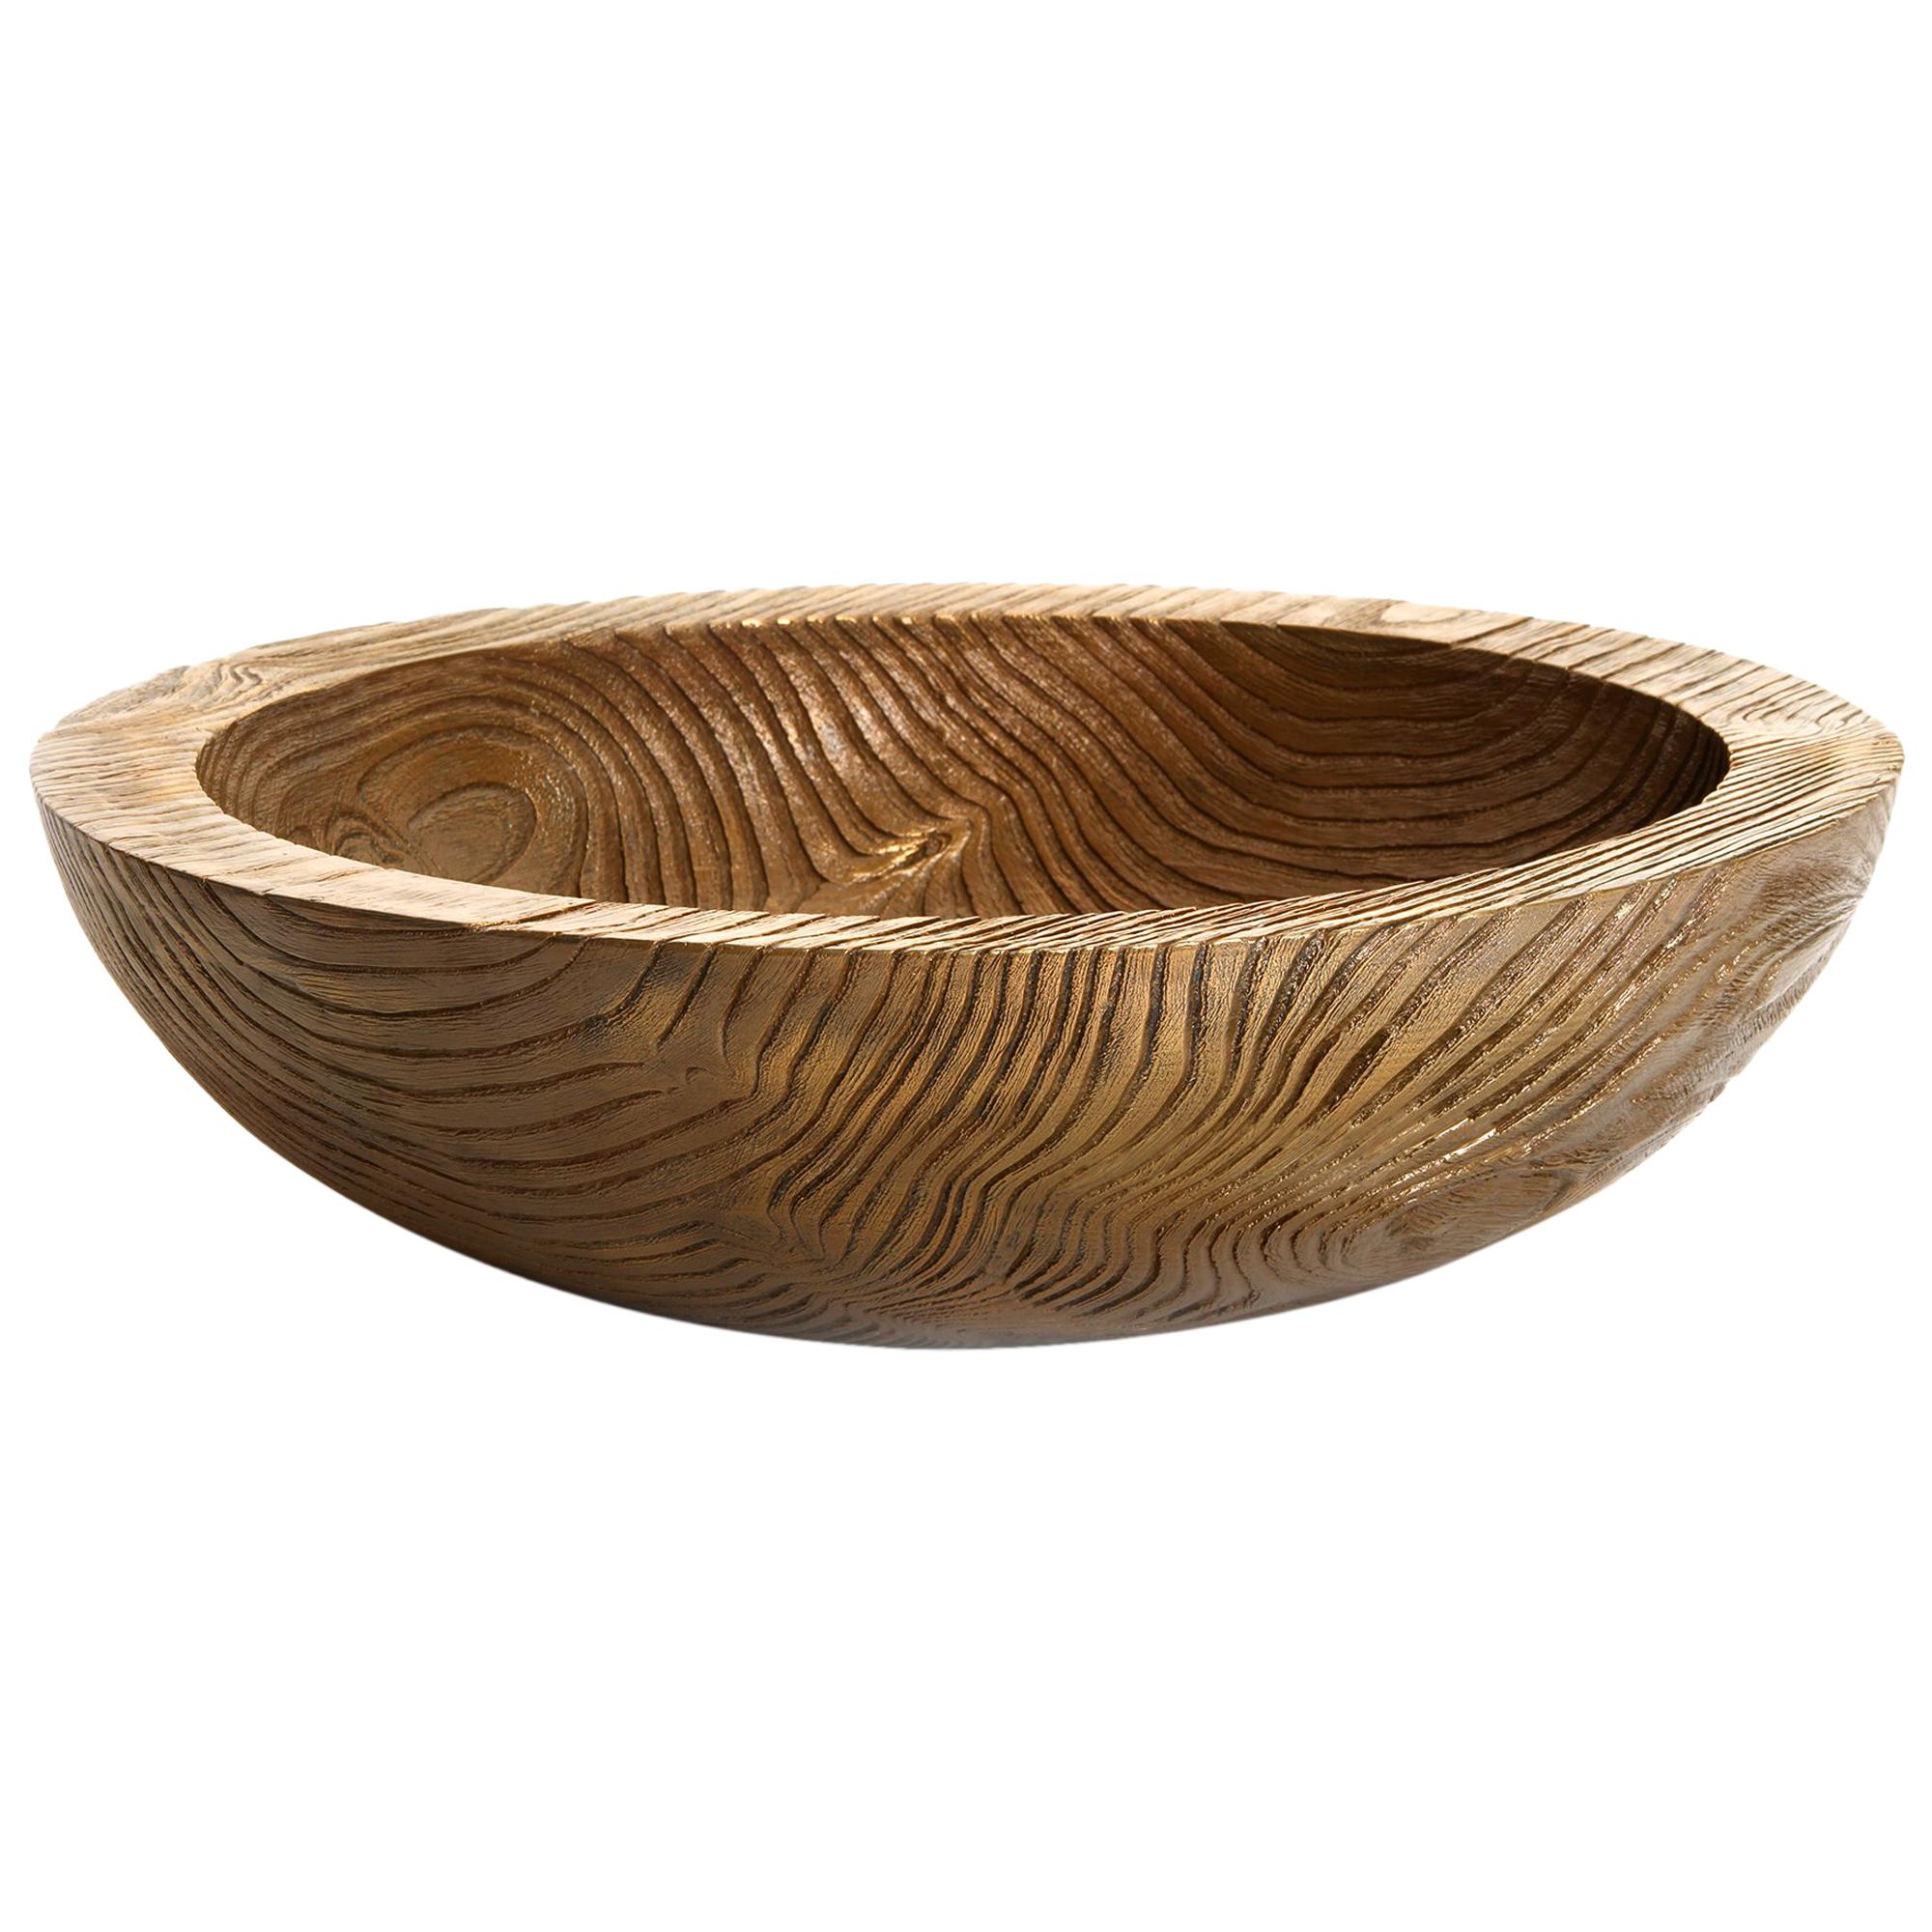 Solid Bronze Everest Bowl / Vessel with Wooden Texture and Golden Bronze Patina For Sale